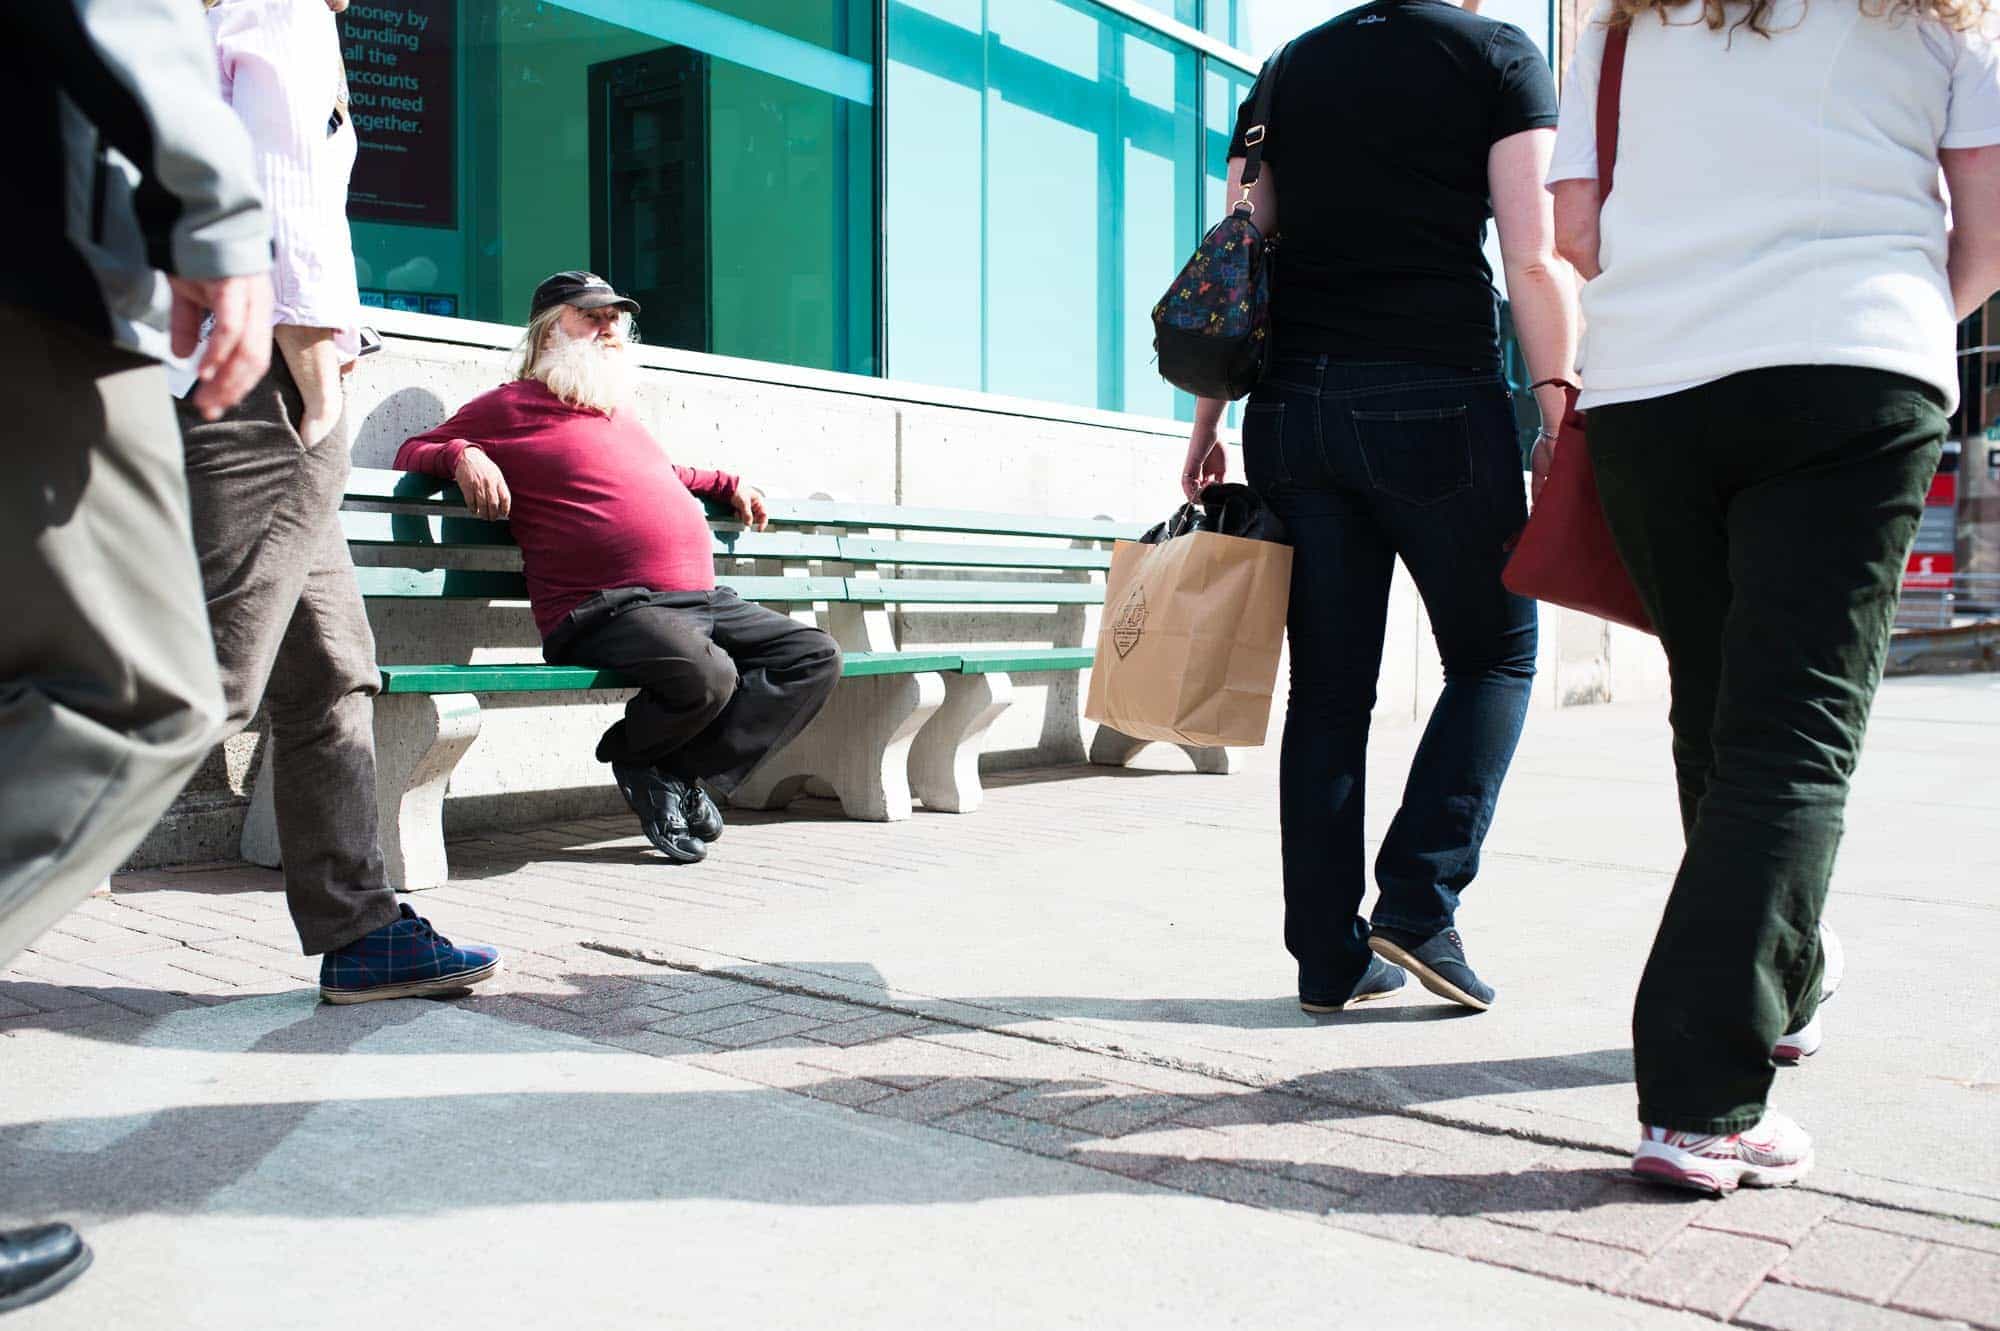 A photograph on Water Street in St. John's shows a large belly man in a red shirt and white beard relaxing on a park bench as people pass by.